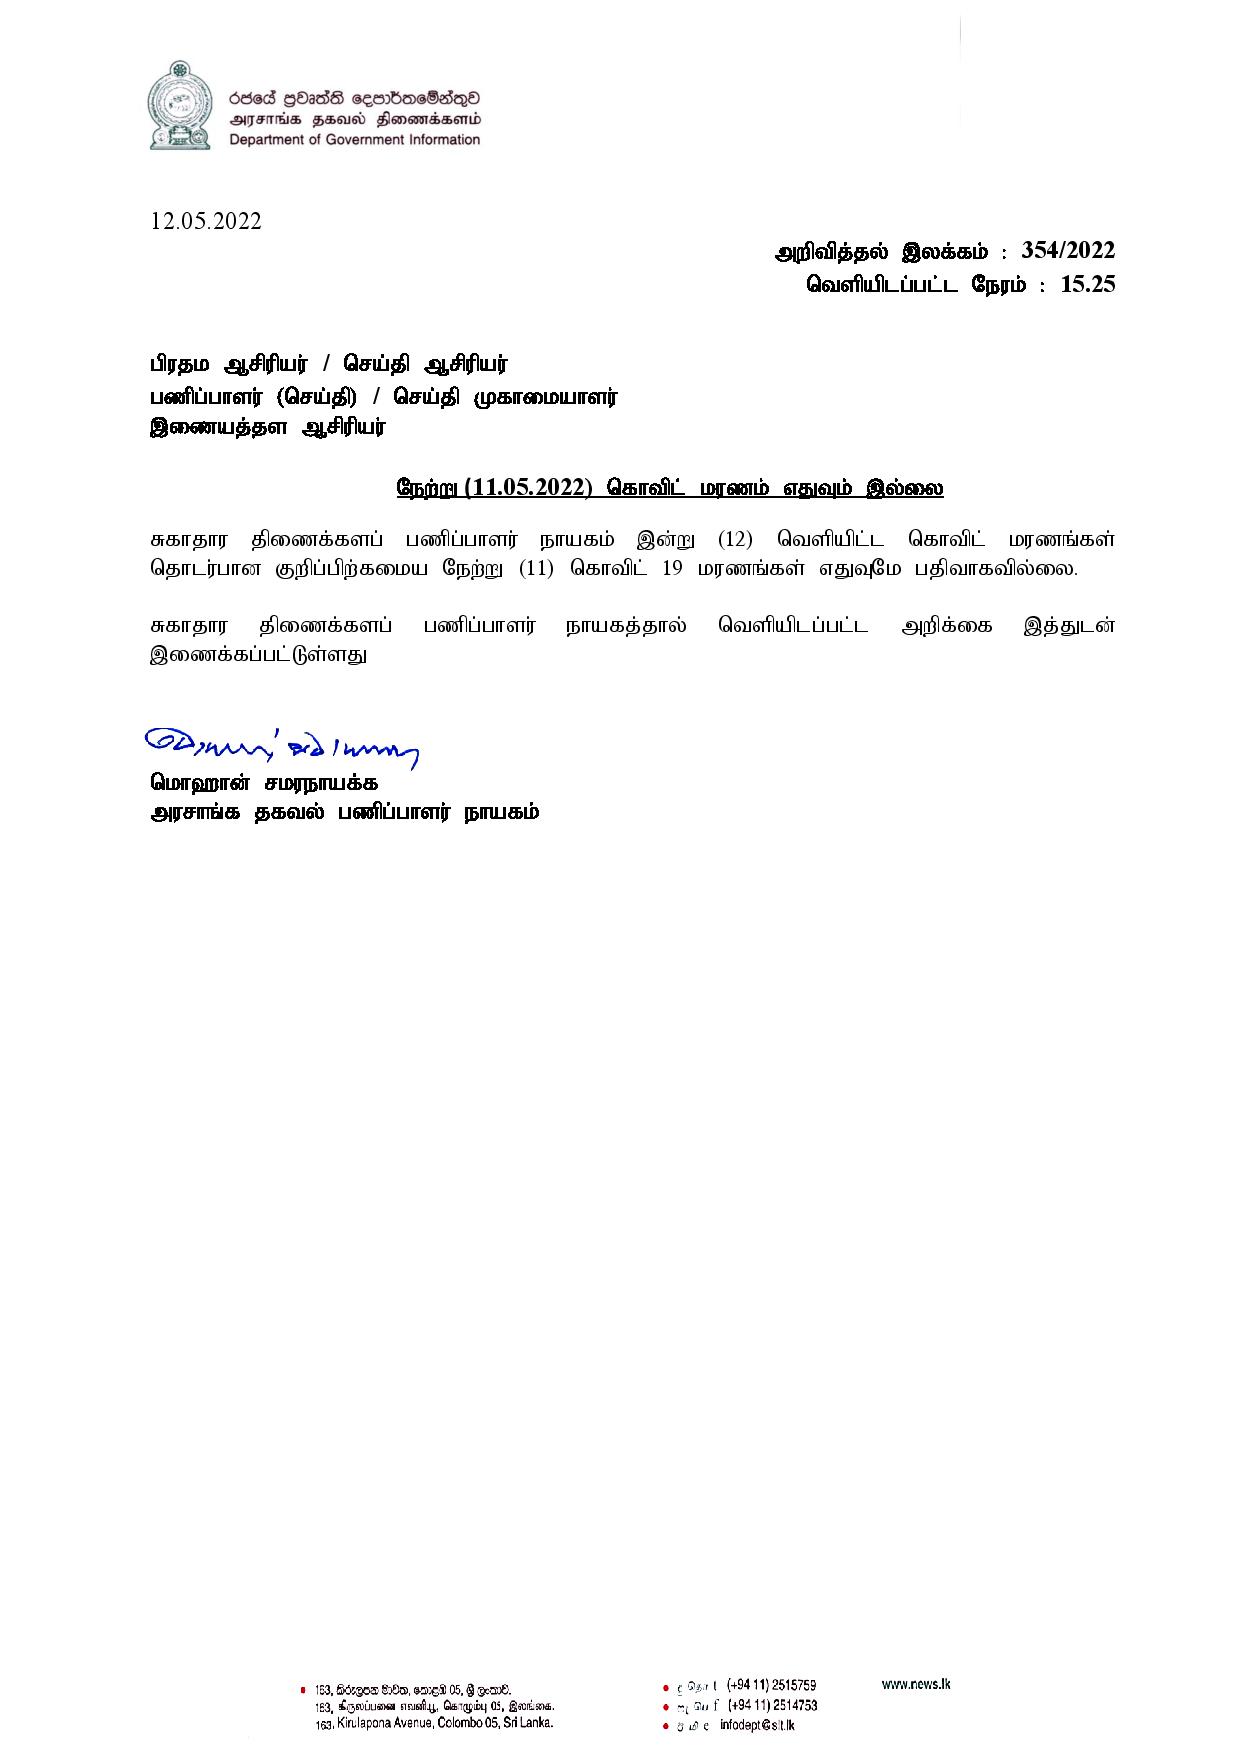 Release No 354 Tamil page 001